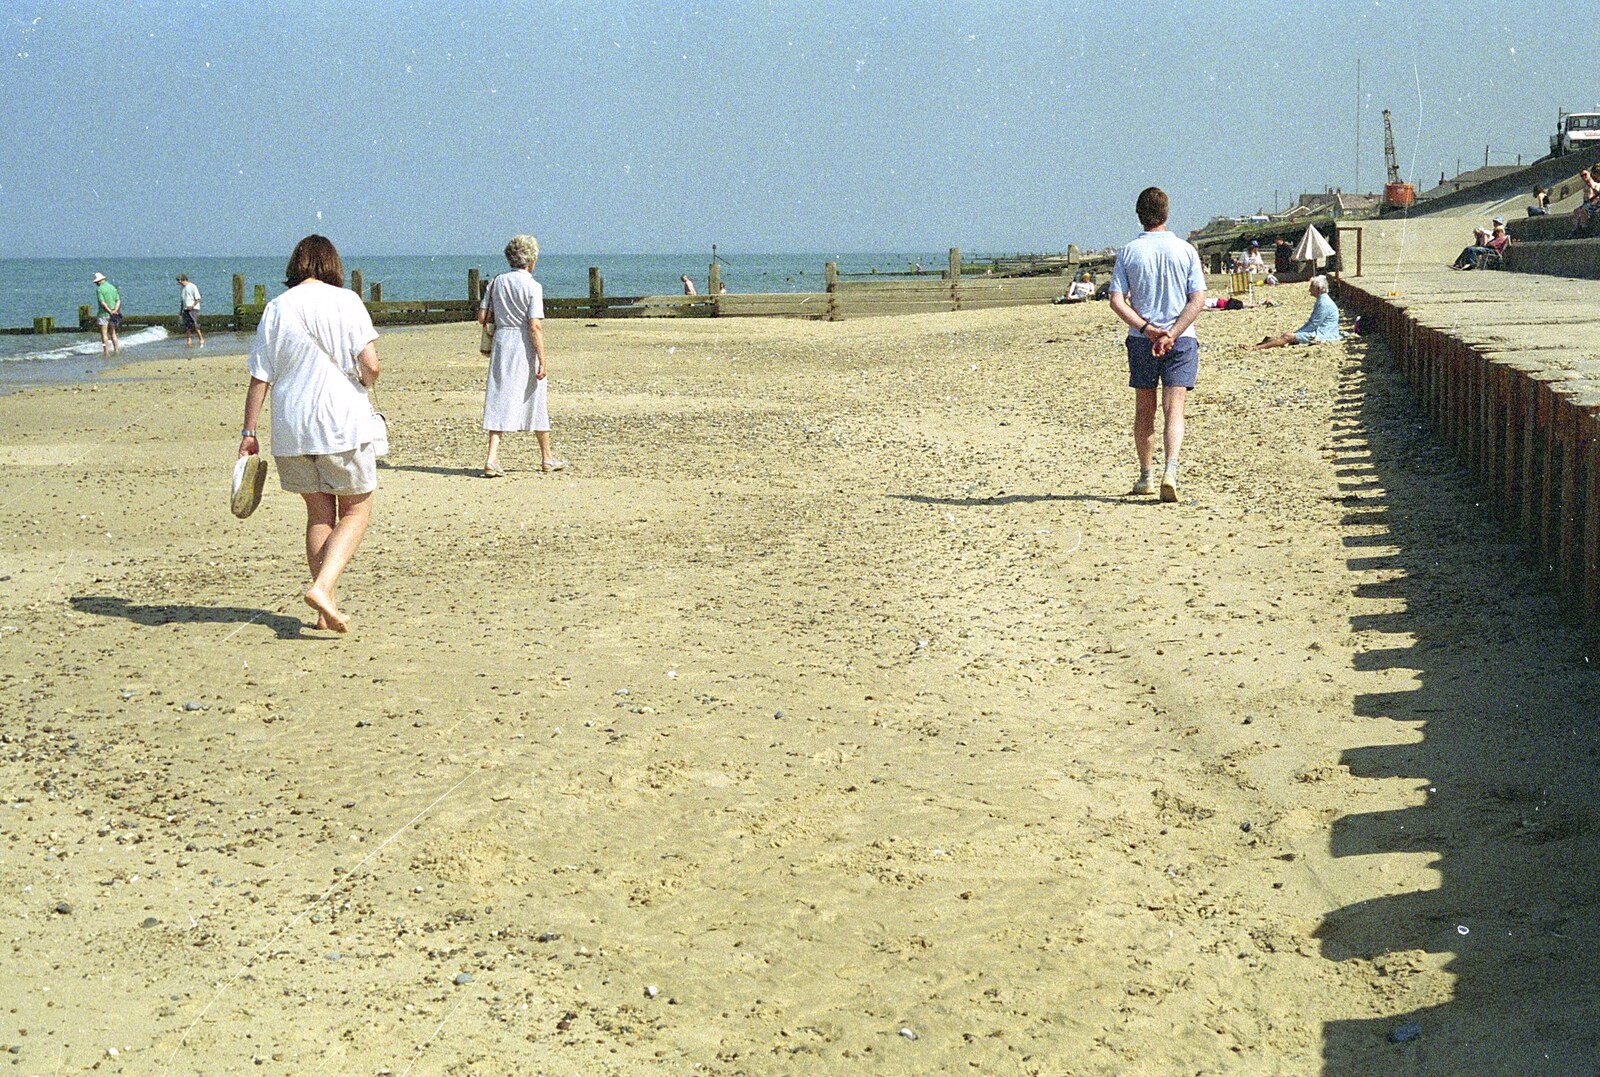 Grandmother, Neil and Caroline Visit, Brome and Orford, Suffolk - 24th July 1995: Walking along the beach